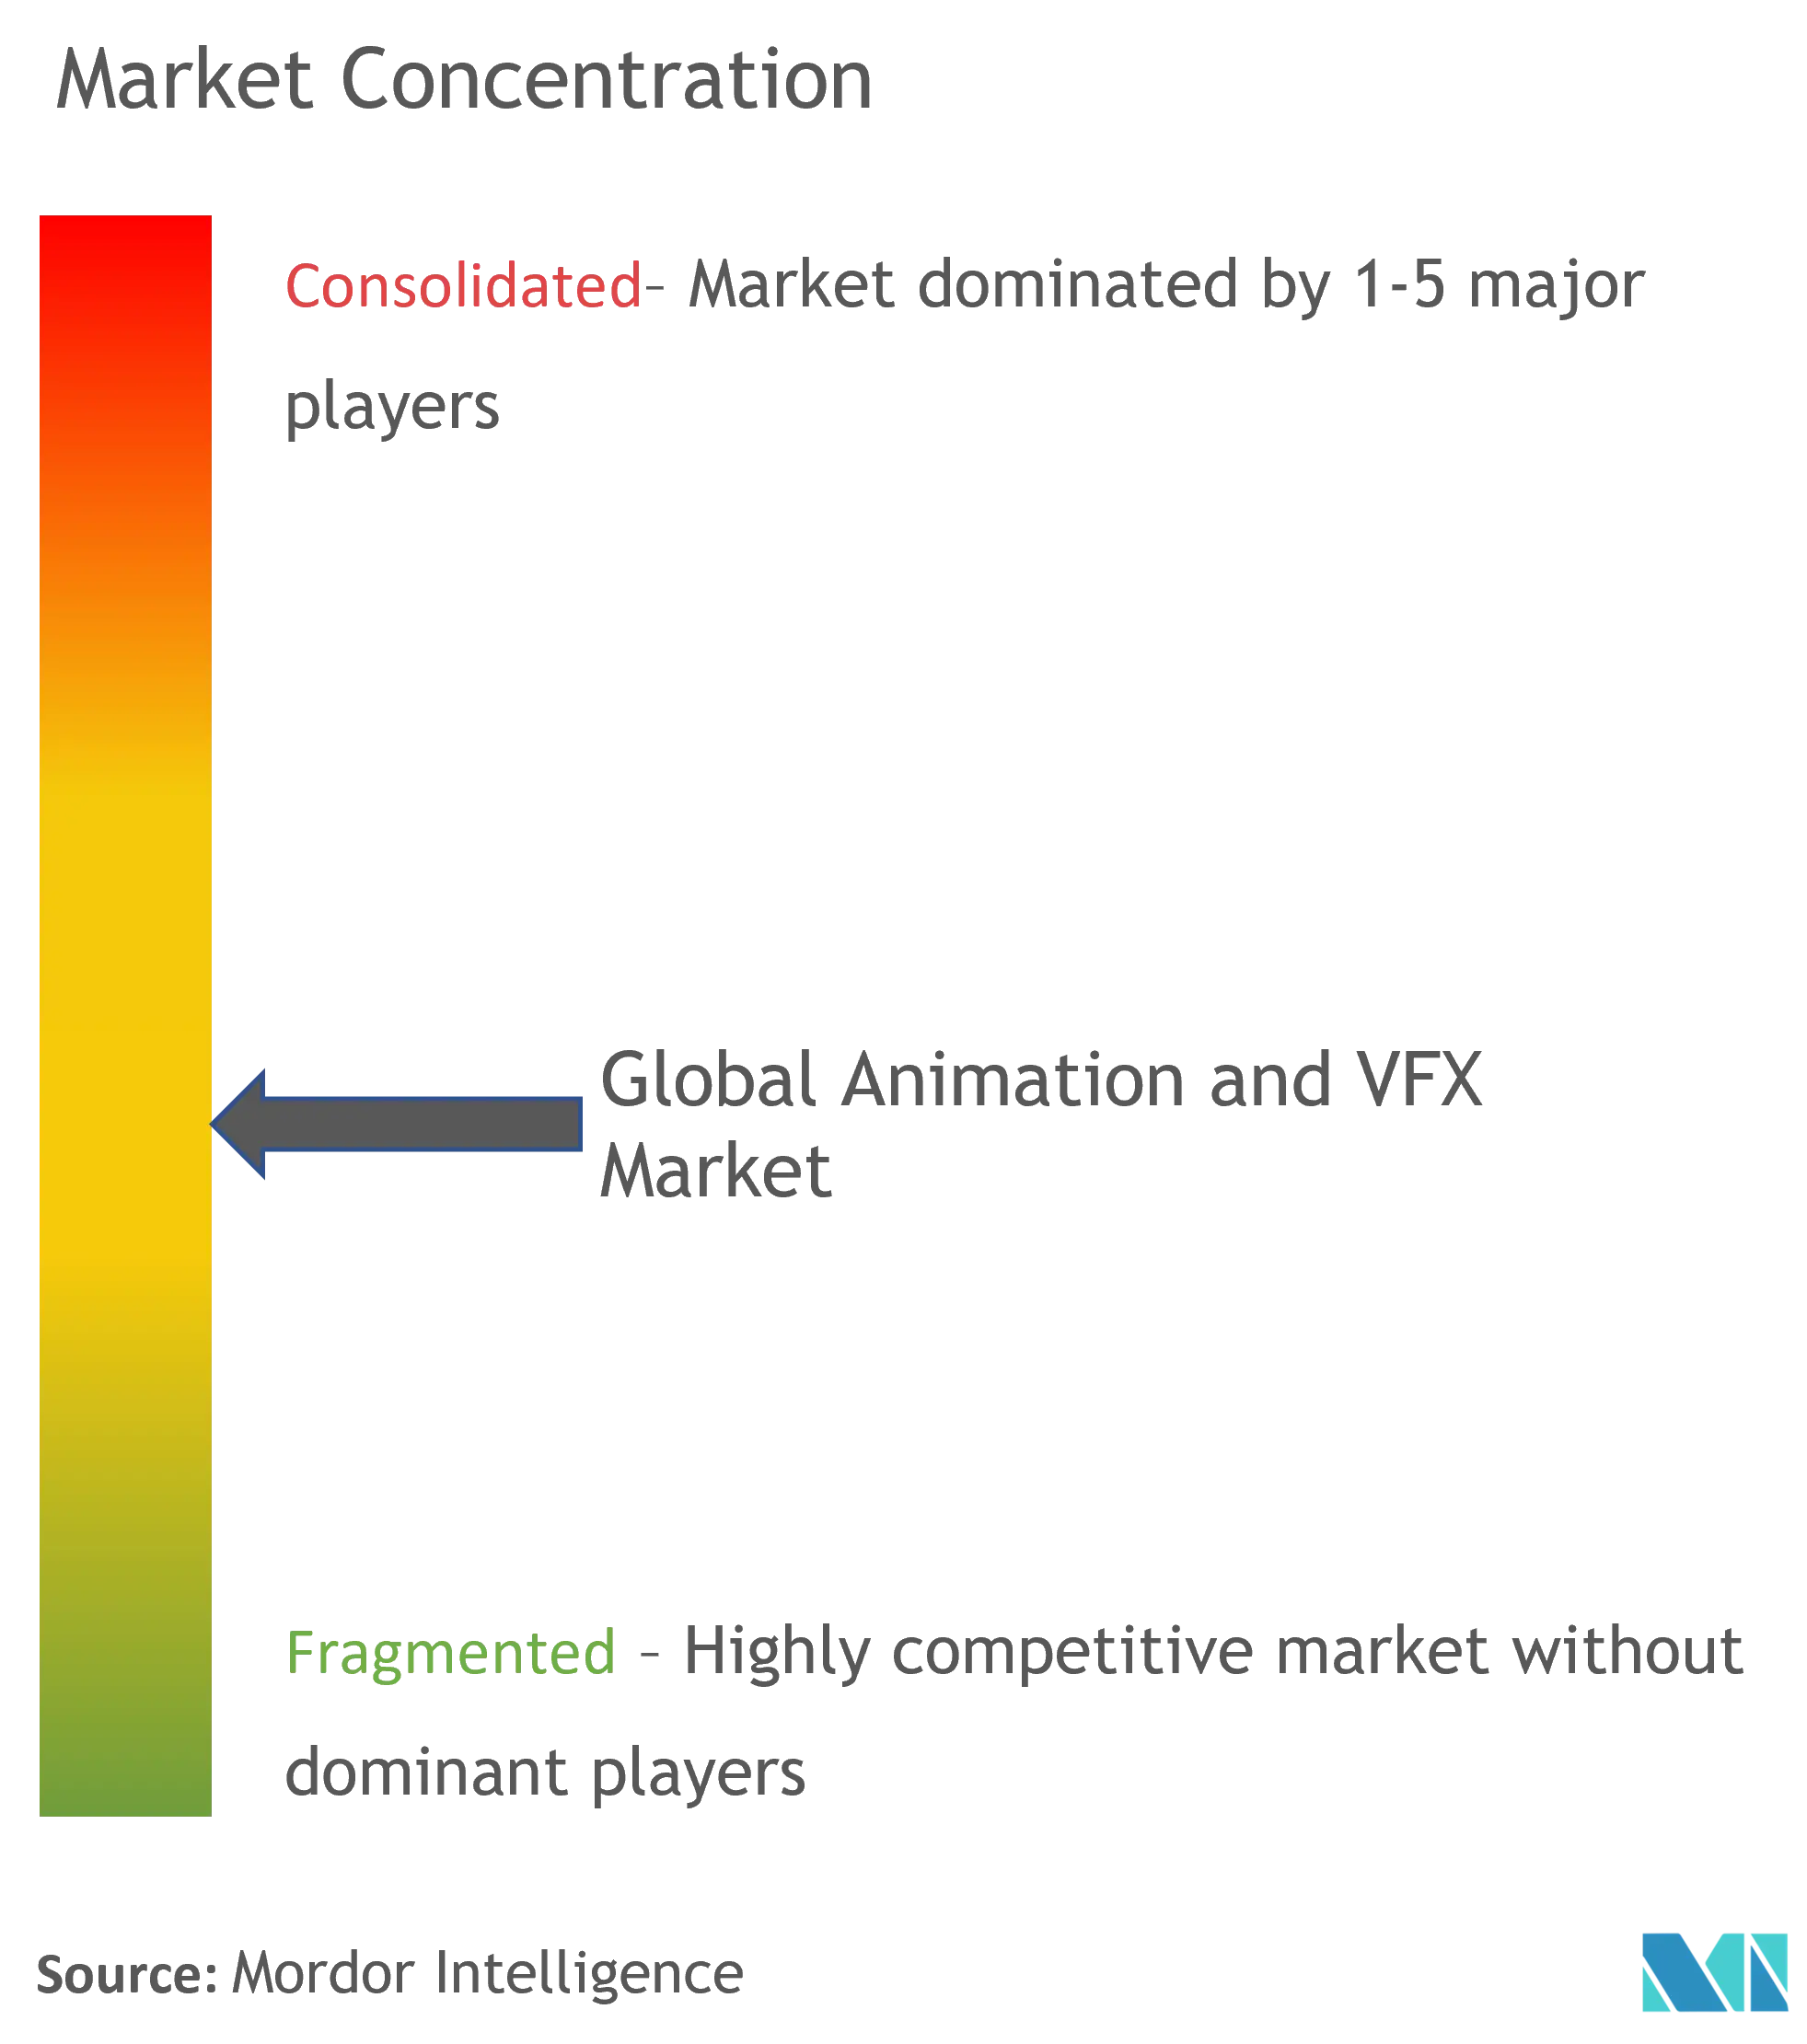 Animation and VFX Market Concentration